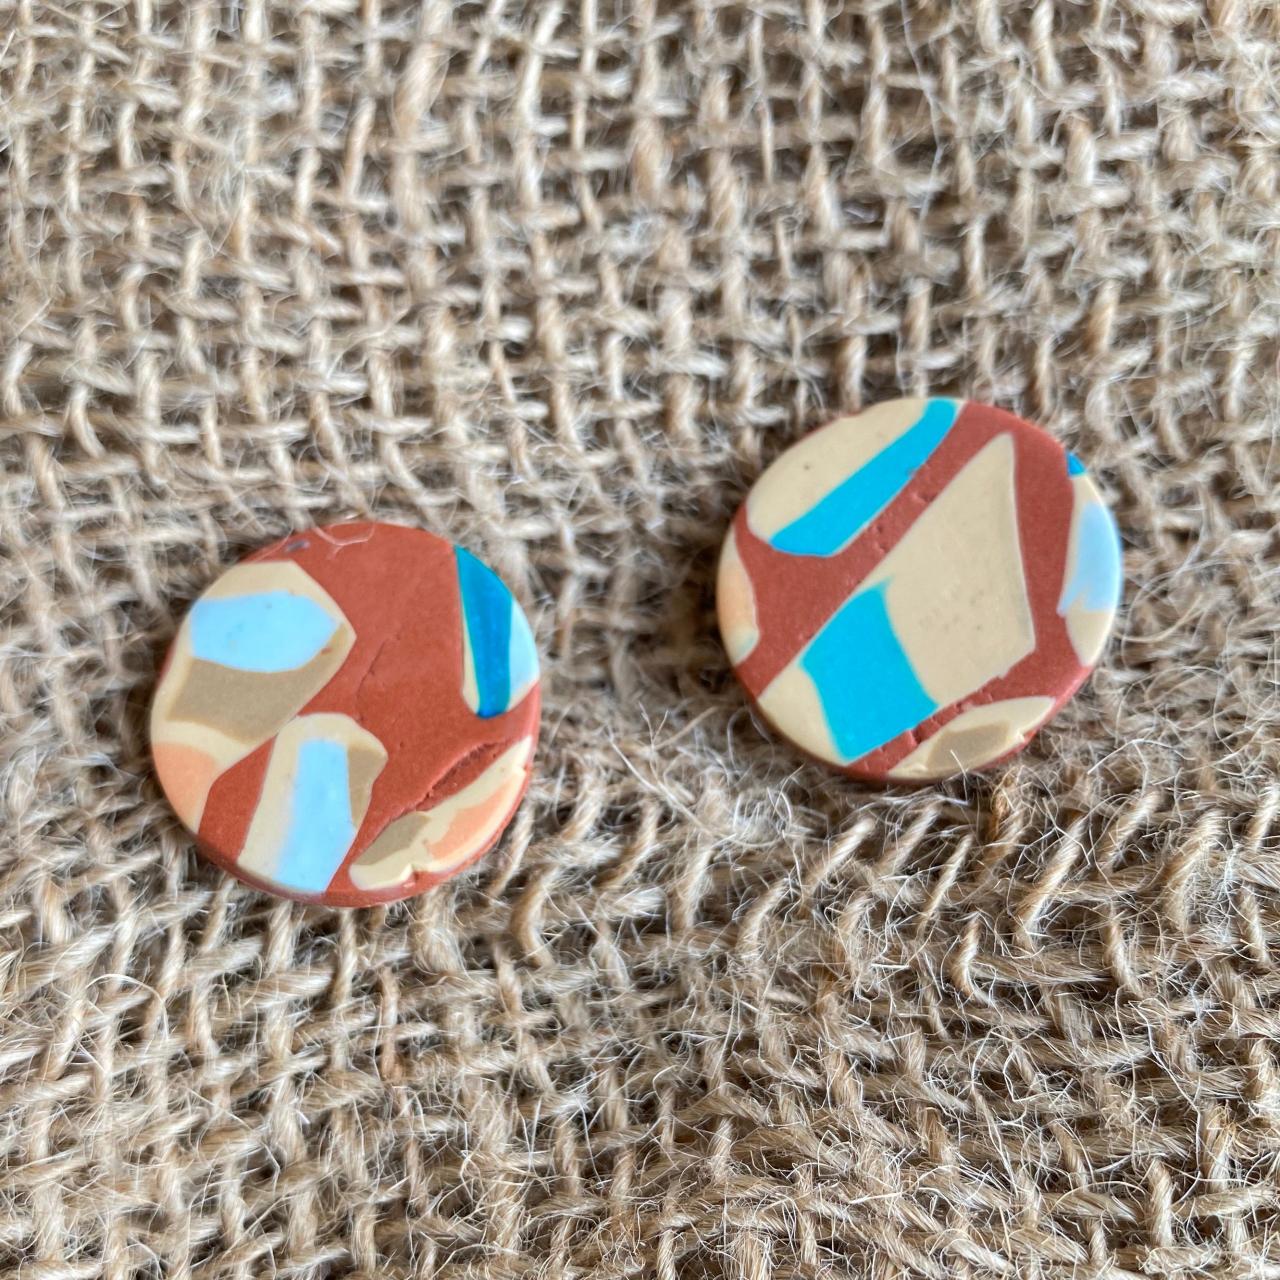 Polymer Clay Earrings Studs | Large Designed Studs | Terrazzo | Cinnamon Polymer Clay Earrings | Teal | Nude | Gold | Brown | Light Weight Polymer Clay Statement Earrings | Handmade | Clay Earrings | Handmade